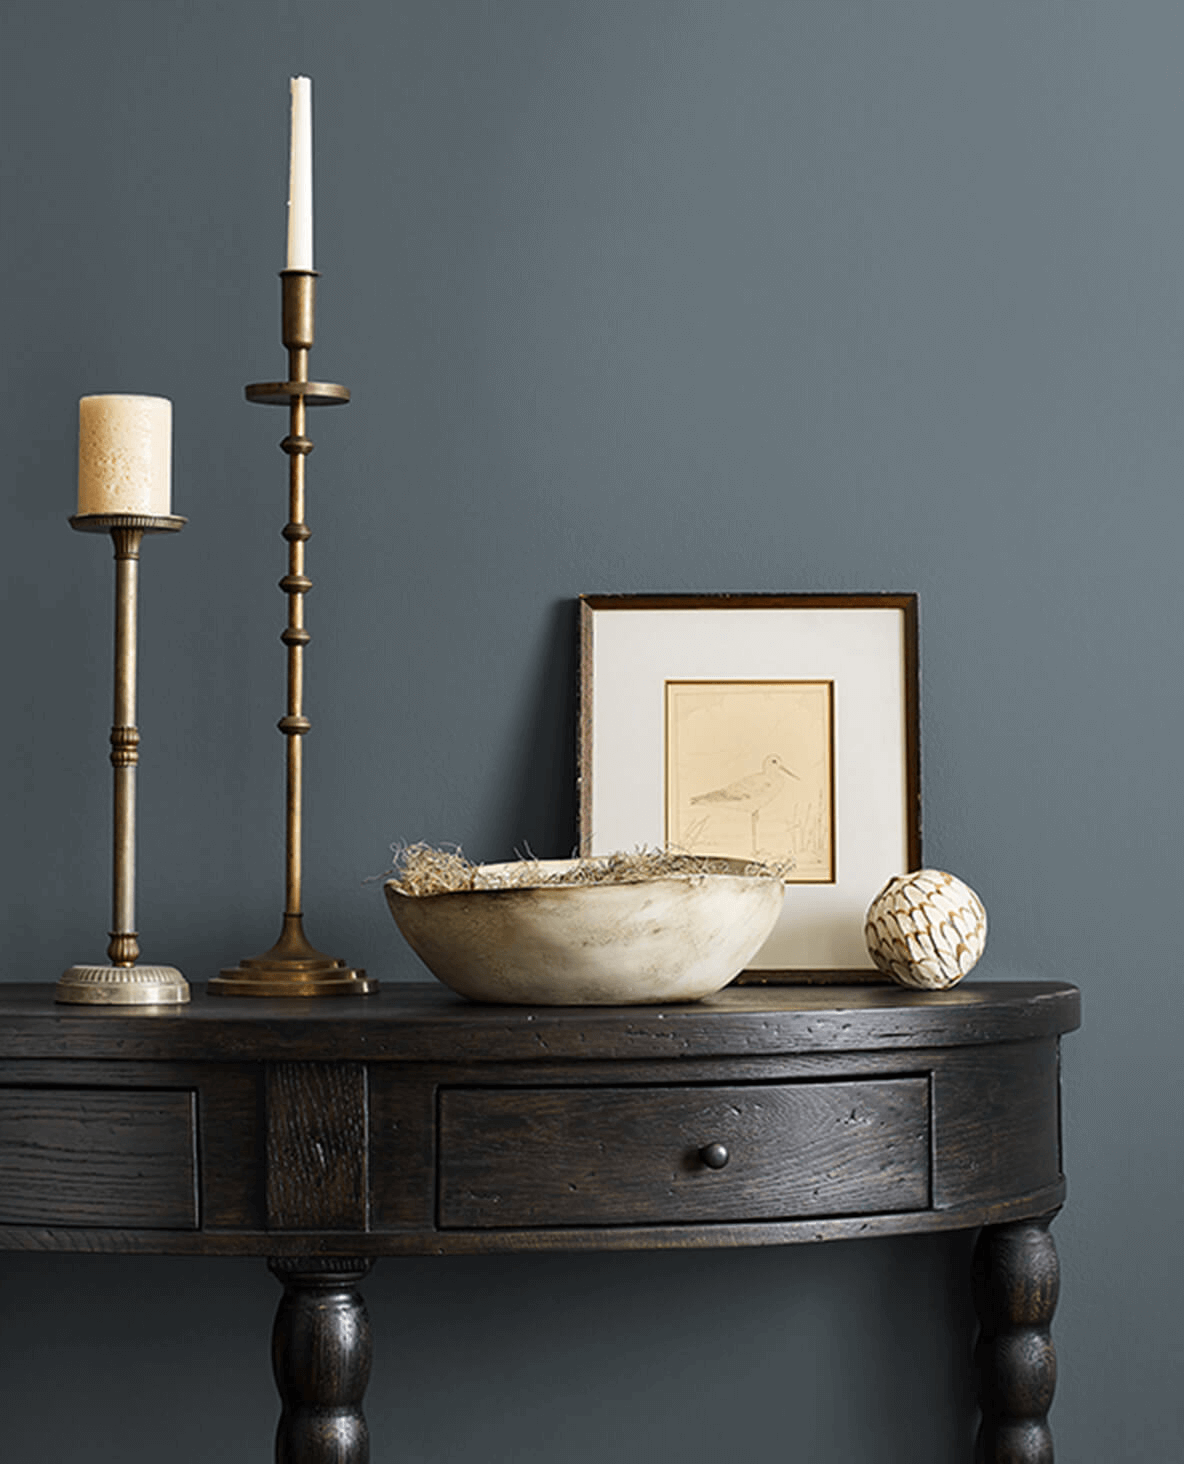 https://www.sherwin-williams.com/content/dam/common/color/SW62/SW6236-grays-harbor-lg.png